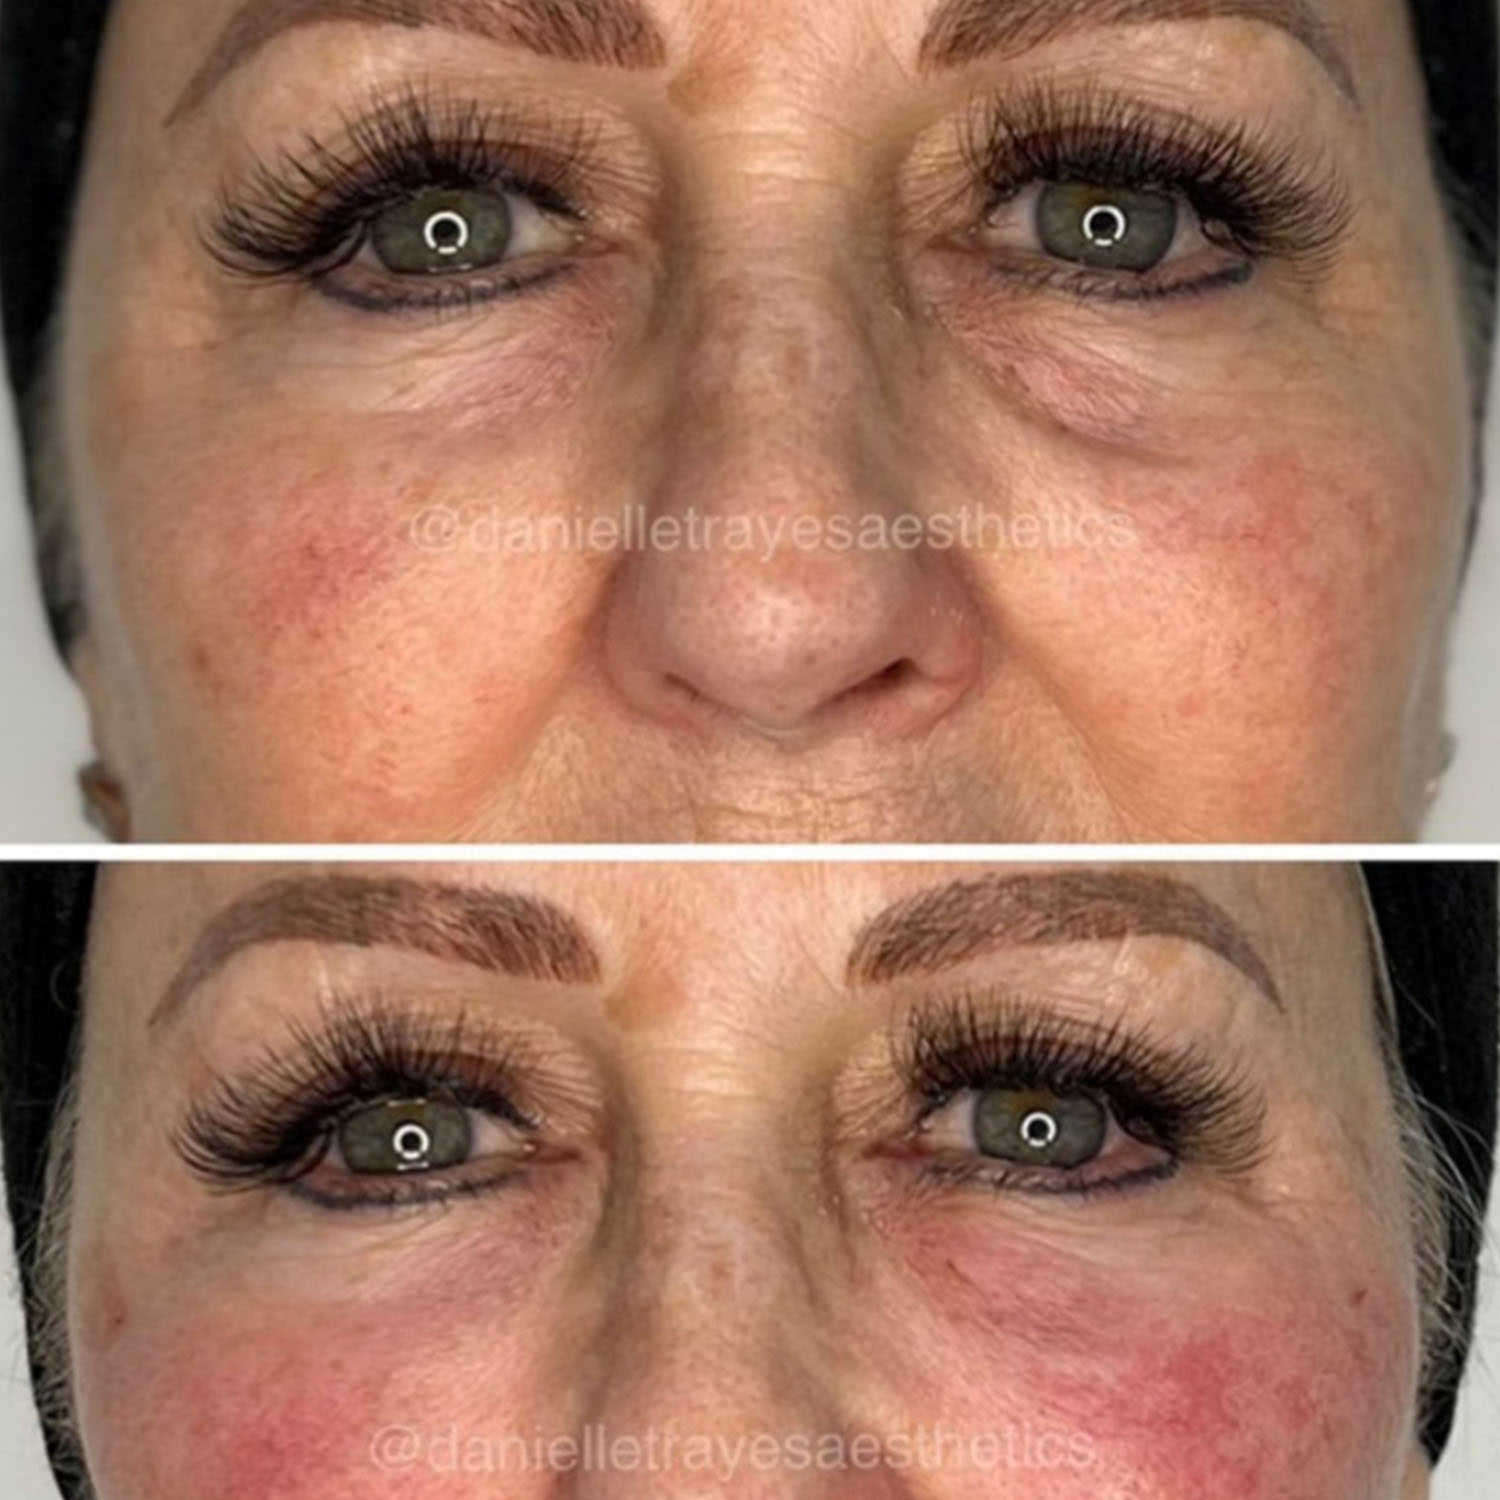 Eye Treatments using modern equipment and technique at Rejuvenate Laser & Skin Clinic